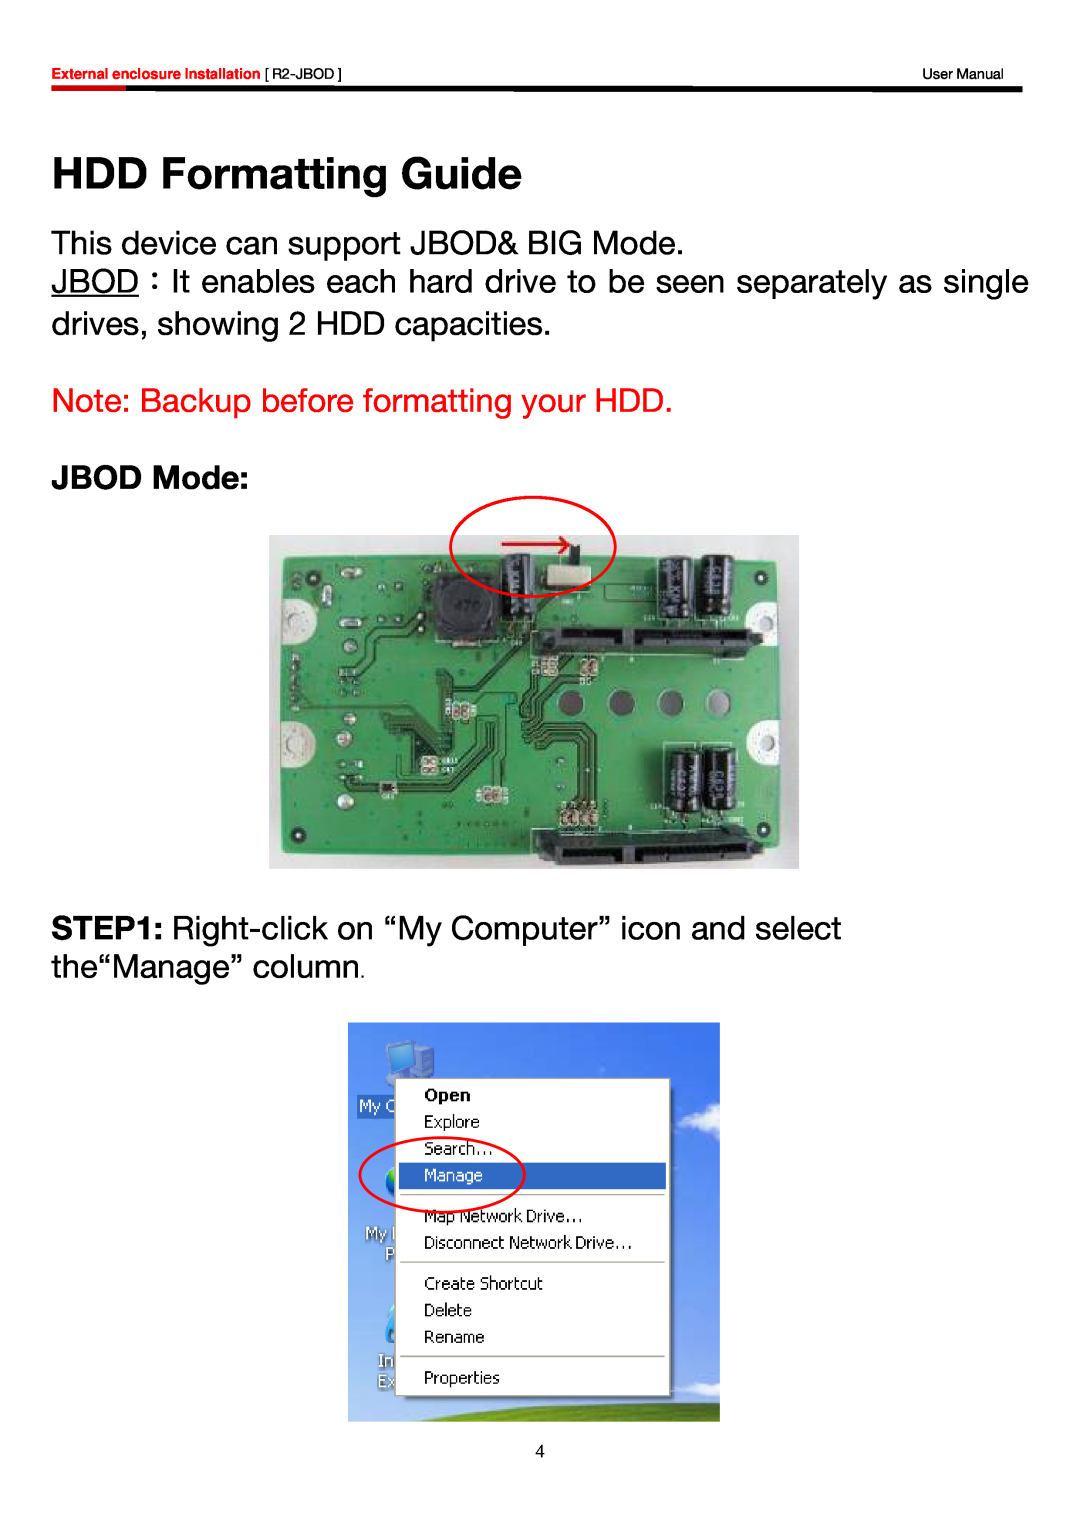 Rosewill R2-JBOD user manual HDD Formatting Guide, This device can support JBOD& BIG Mode, JBOD Mode, User Manual 